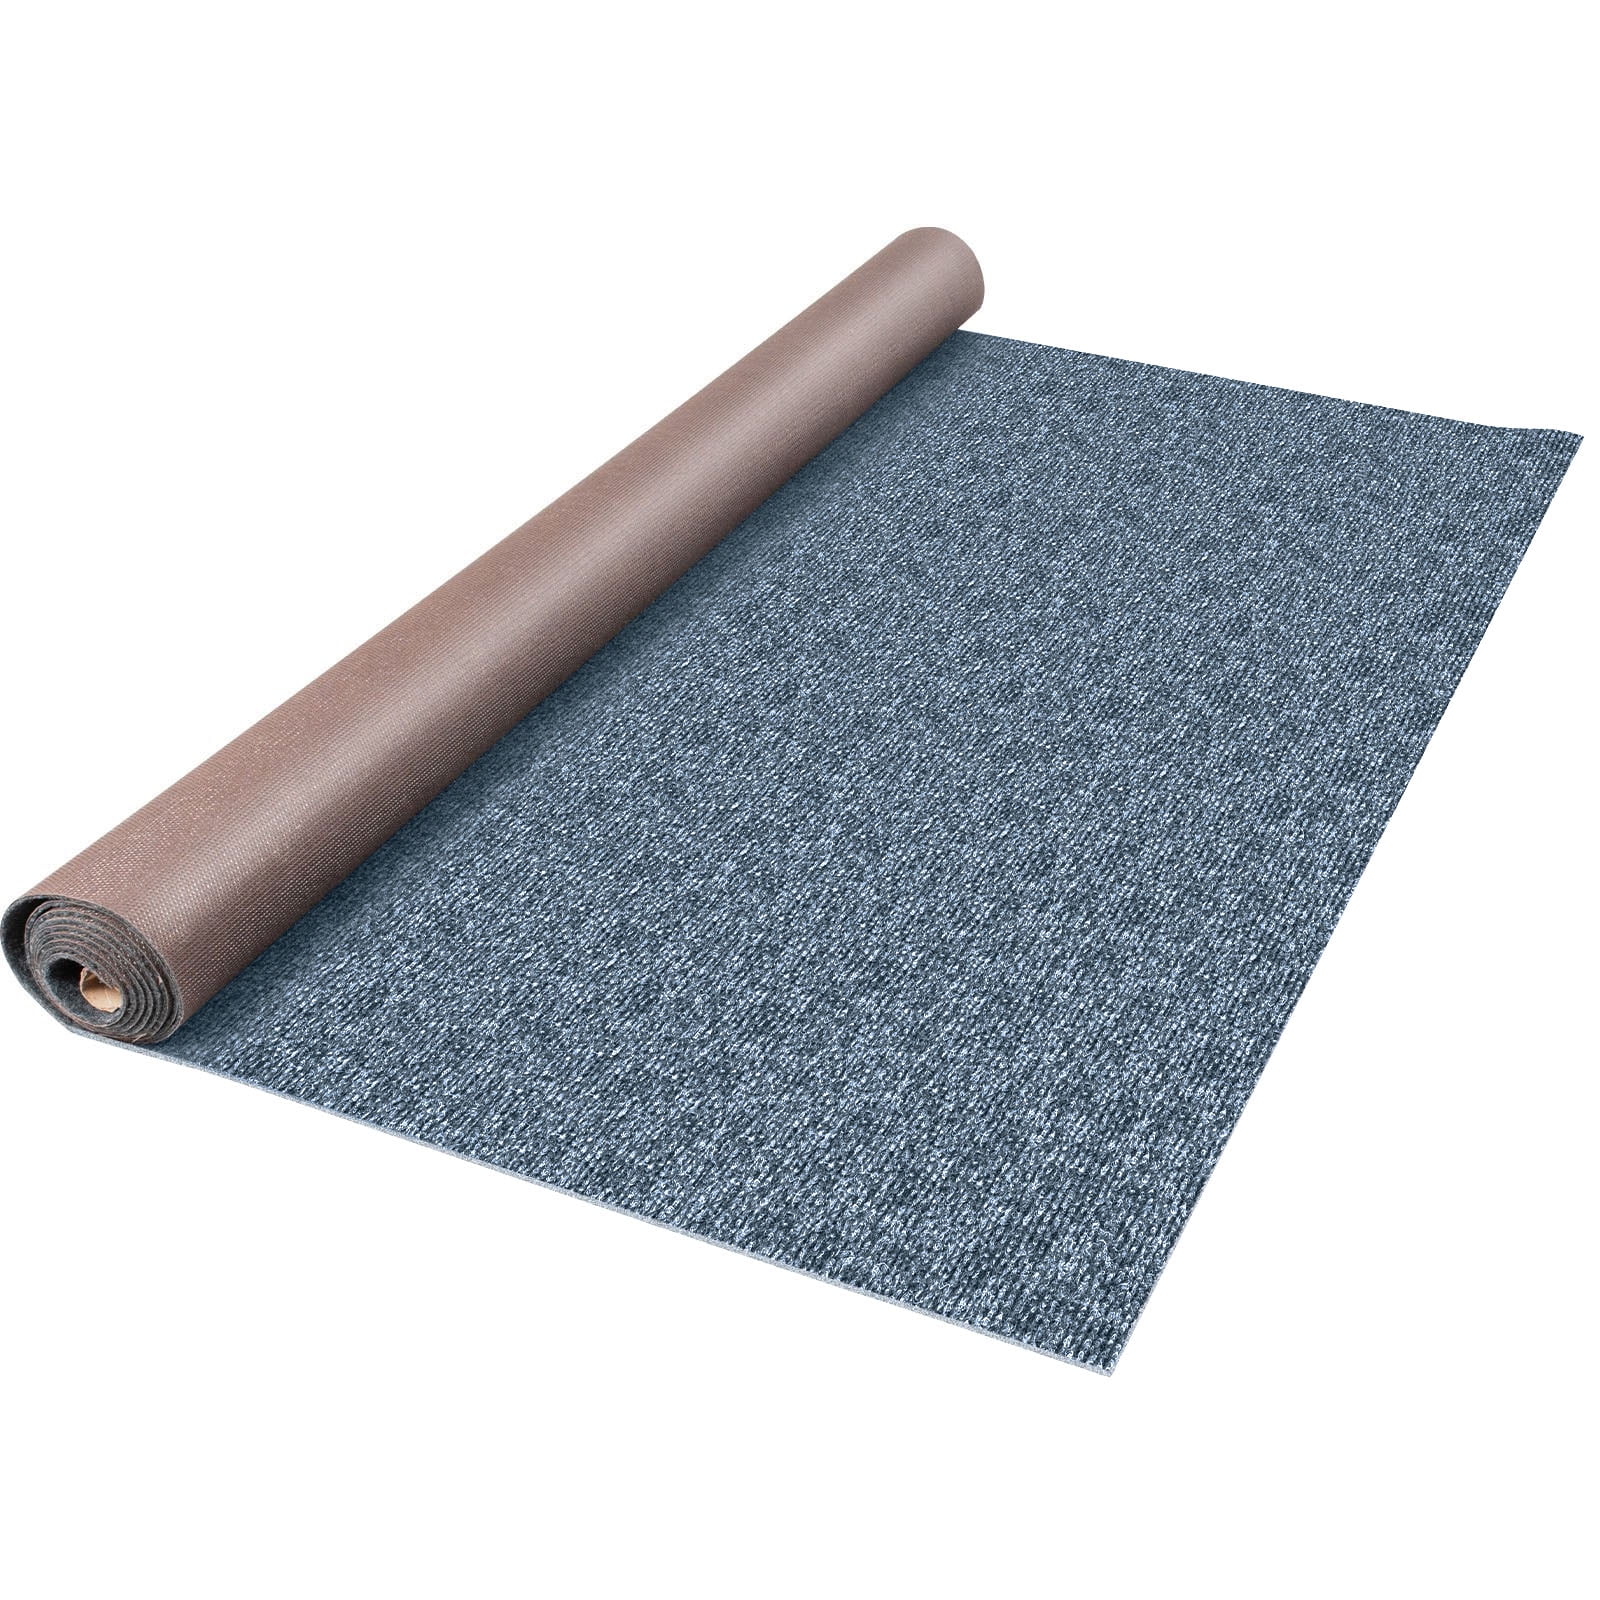 Instabind Carpet Binding - Heather (5ft Section)